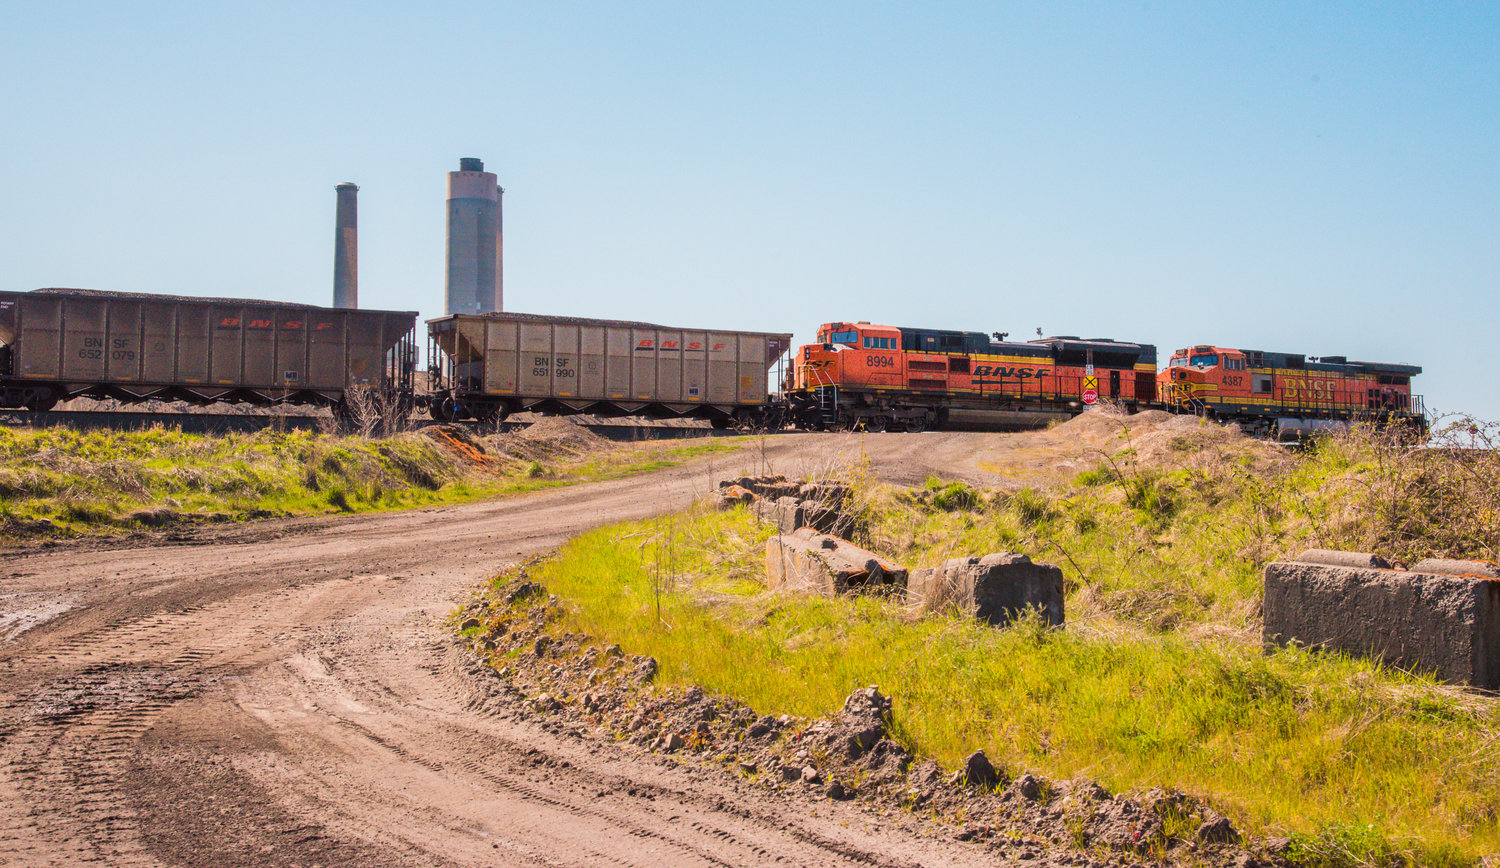 A BNSF train loaded full of coal is seen at TransAlta in Centralia on Thursday.